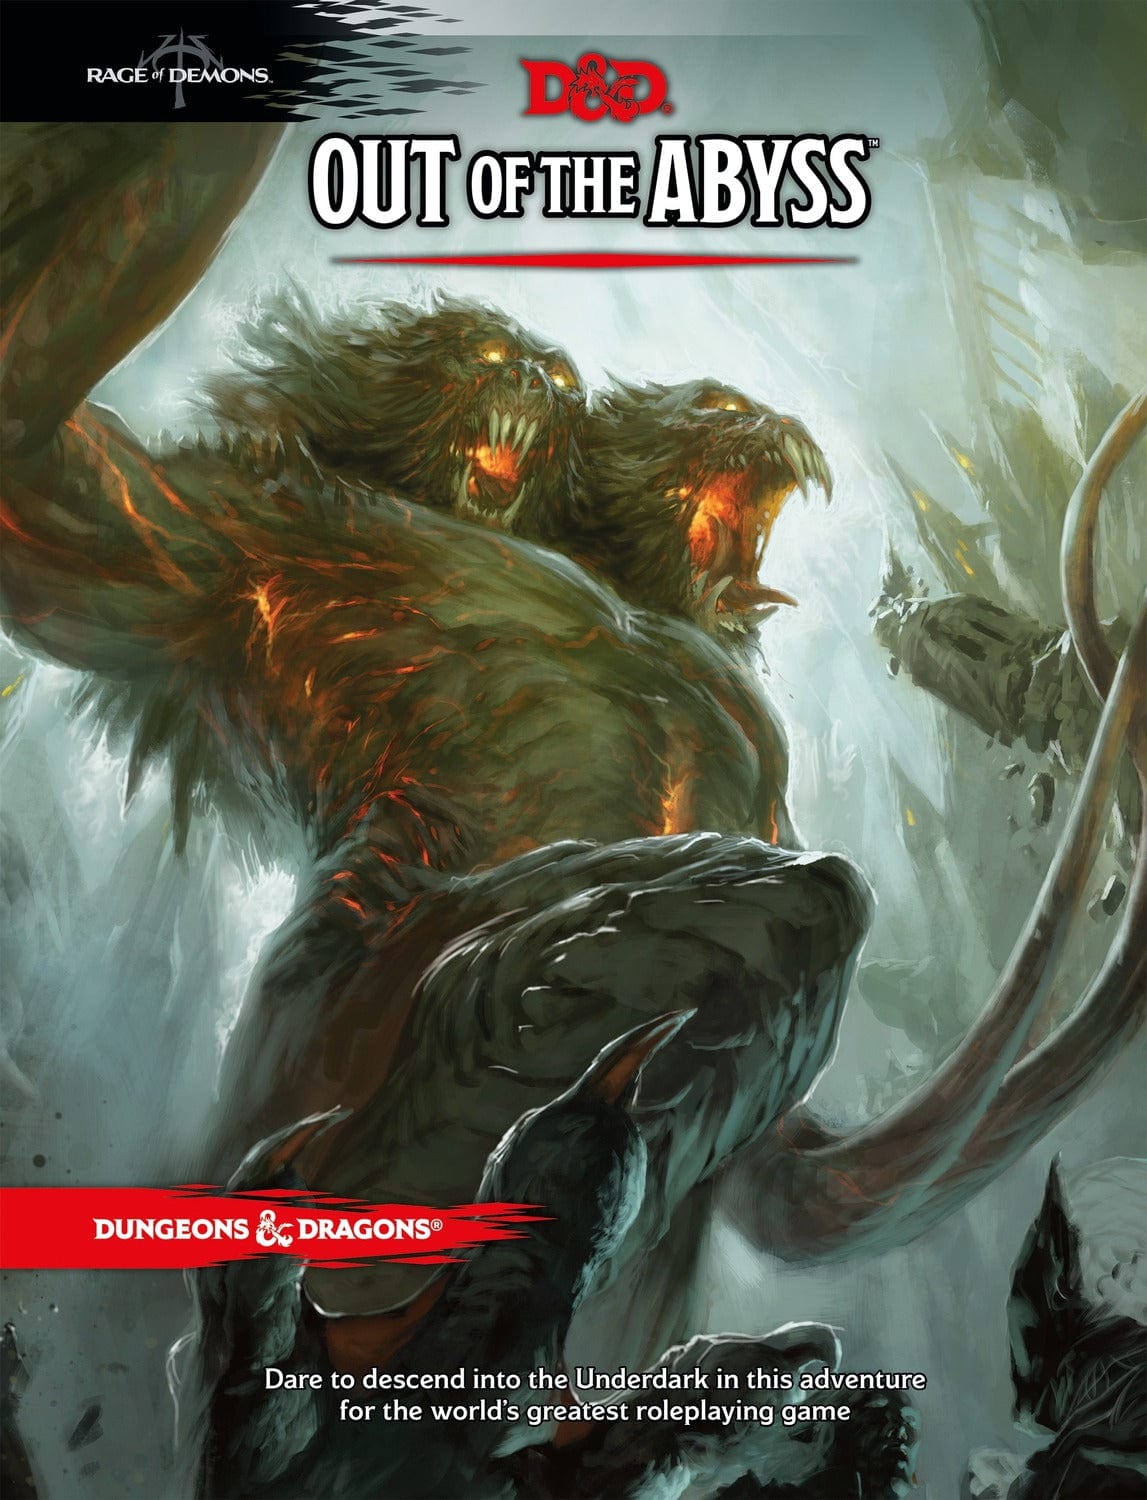 Out of the Abyss - Saltire Games